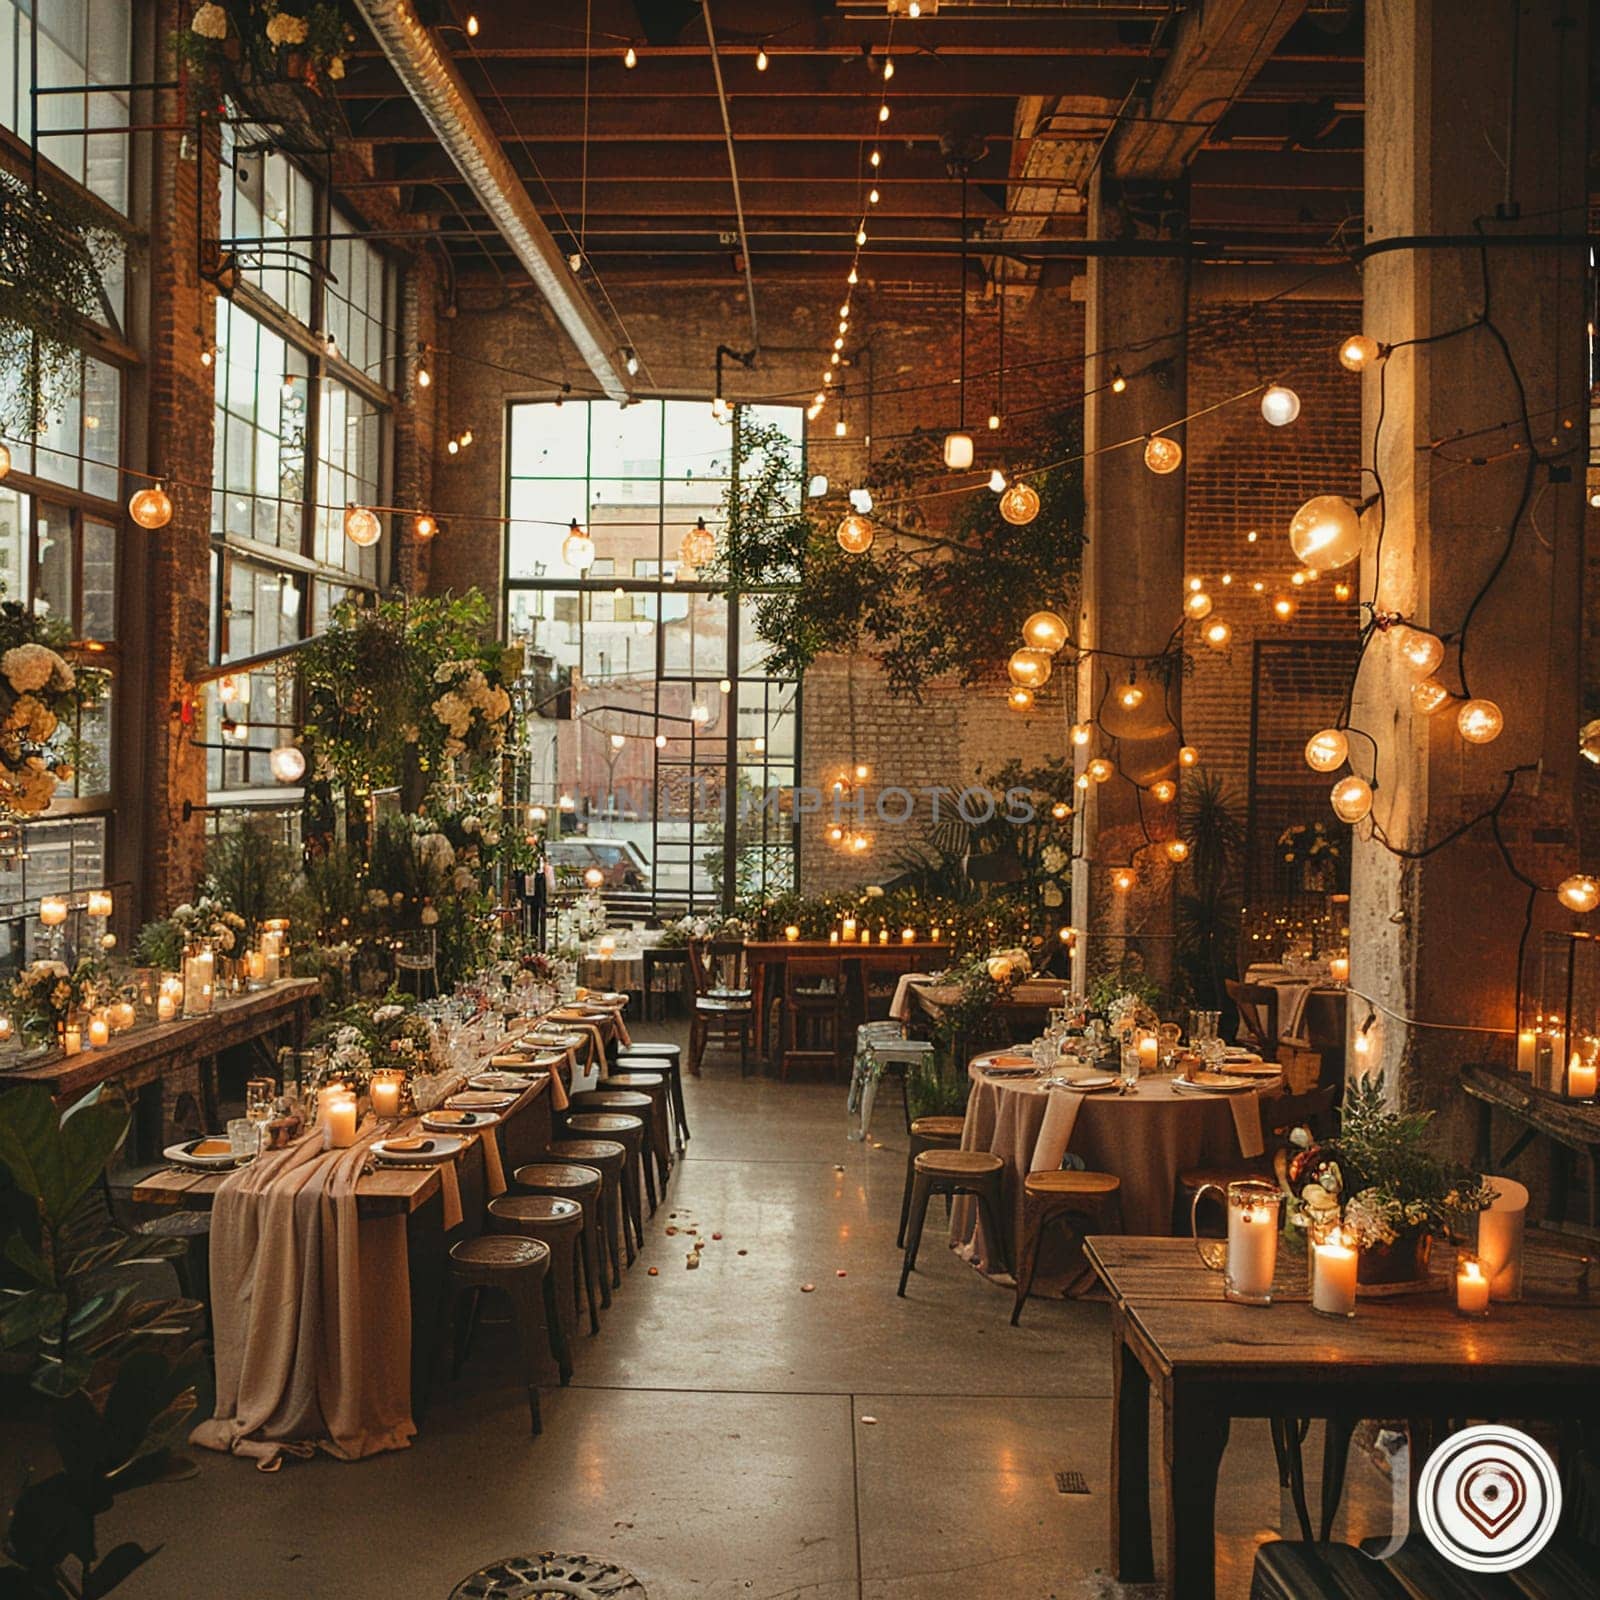 Industrial-chic wedding venue with metal beams and Edison lights.